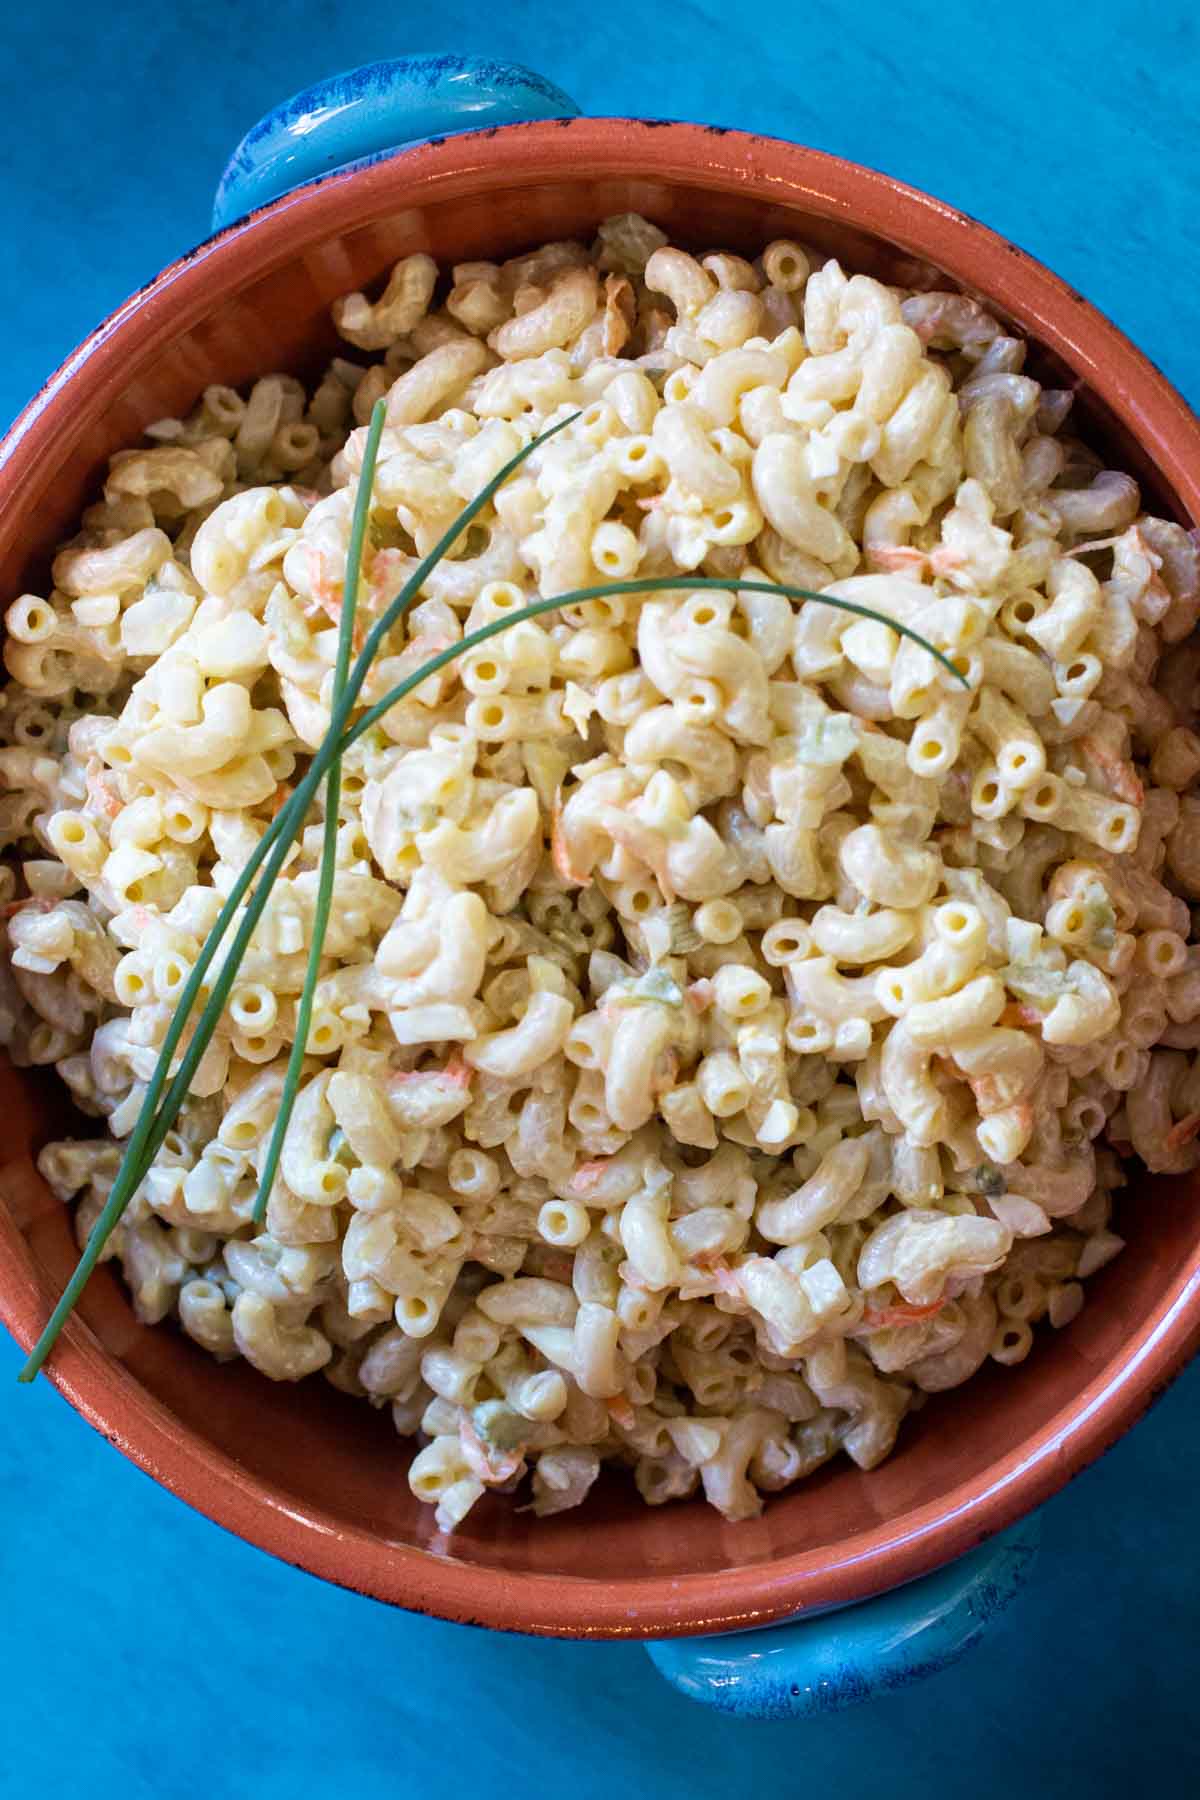 Amish Macaroni Salad served in a rustic bowl.